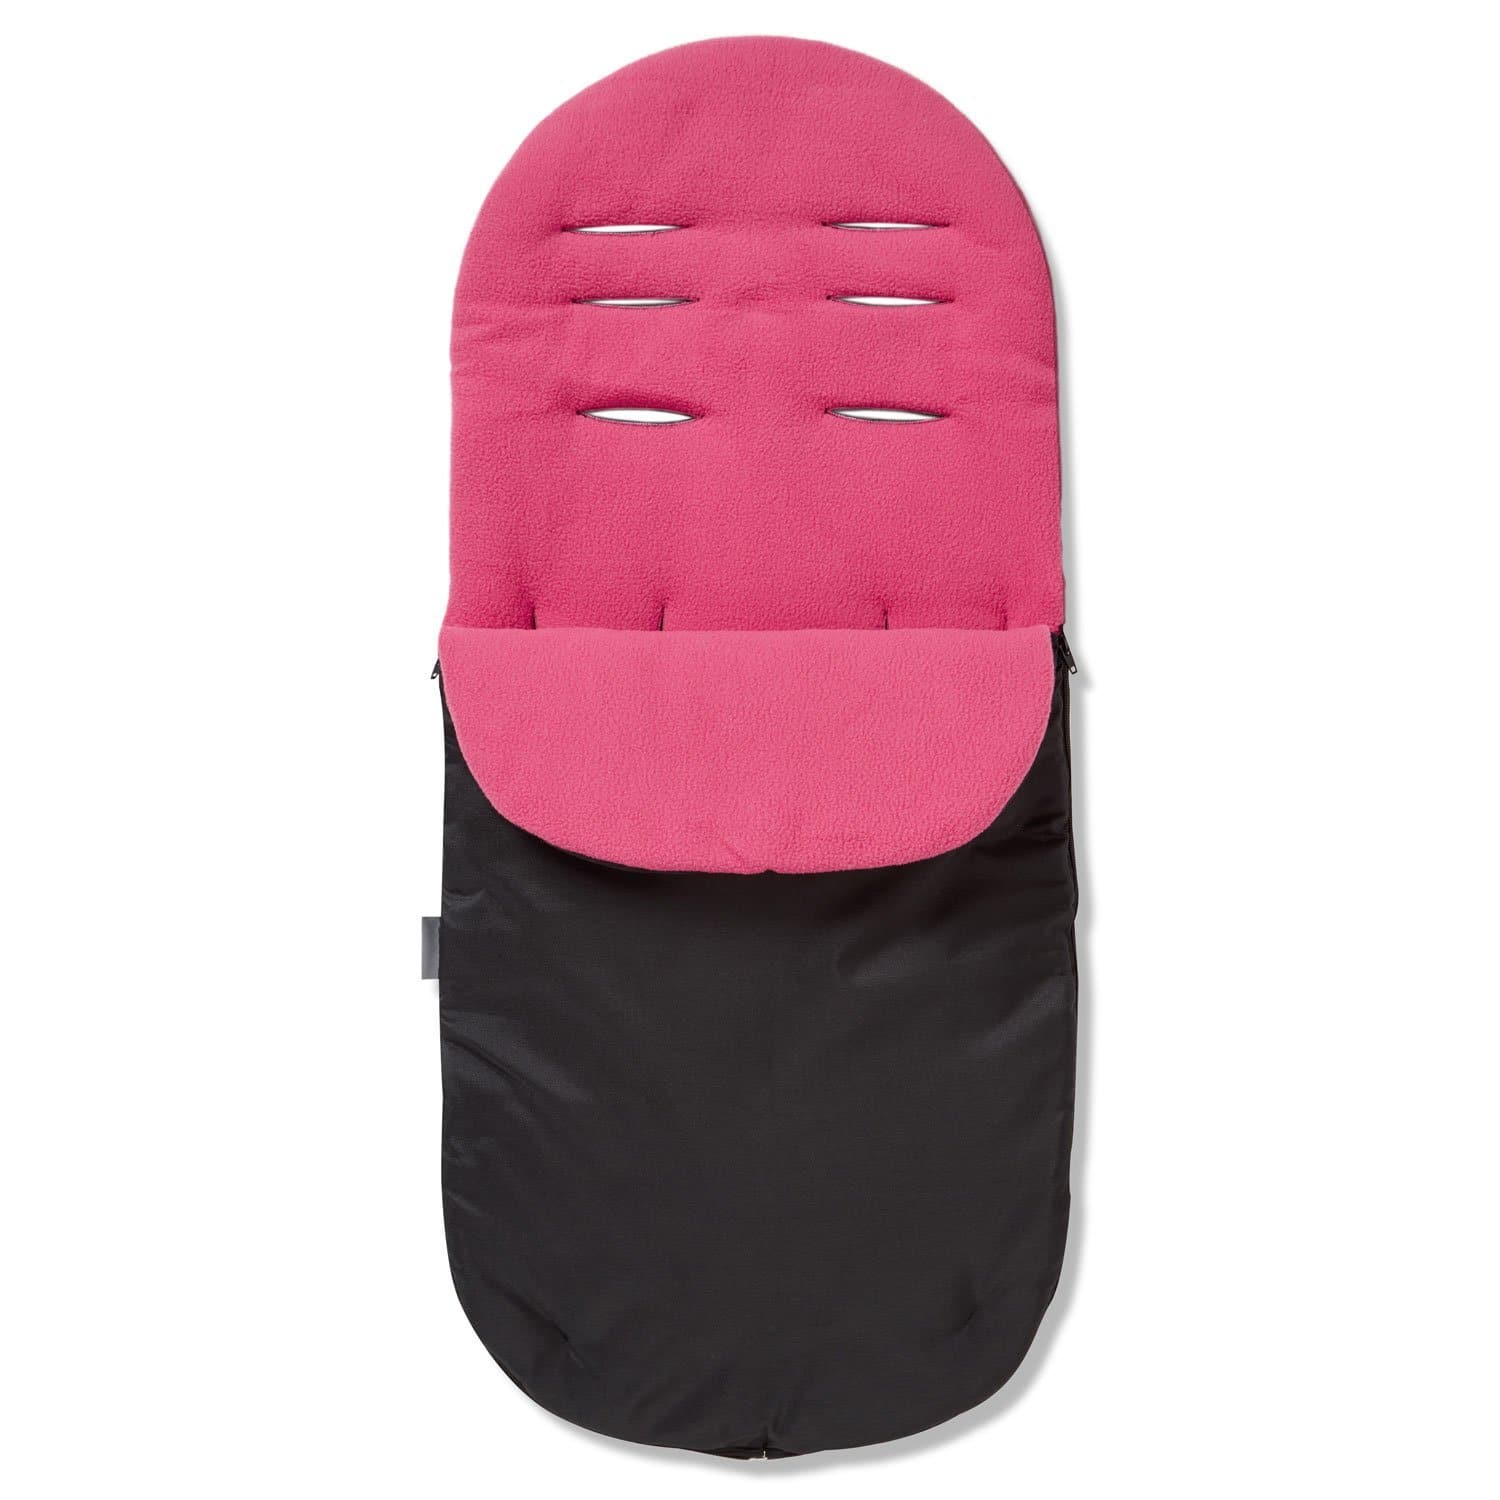 Footmuff / Cosy Toes Compatible with Noukies - Dark Pink / Fits All Models | For Your Little One